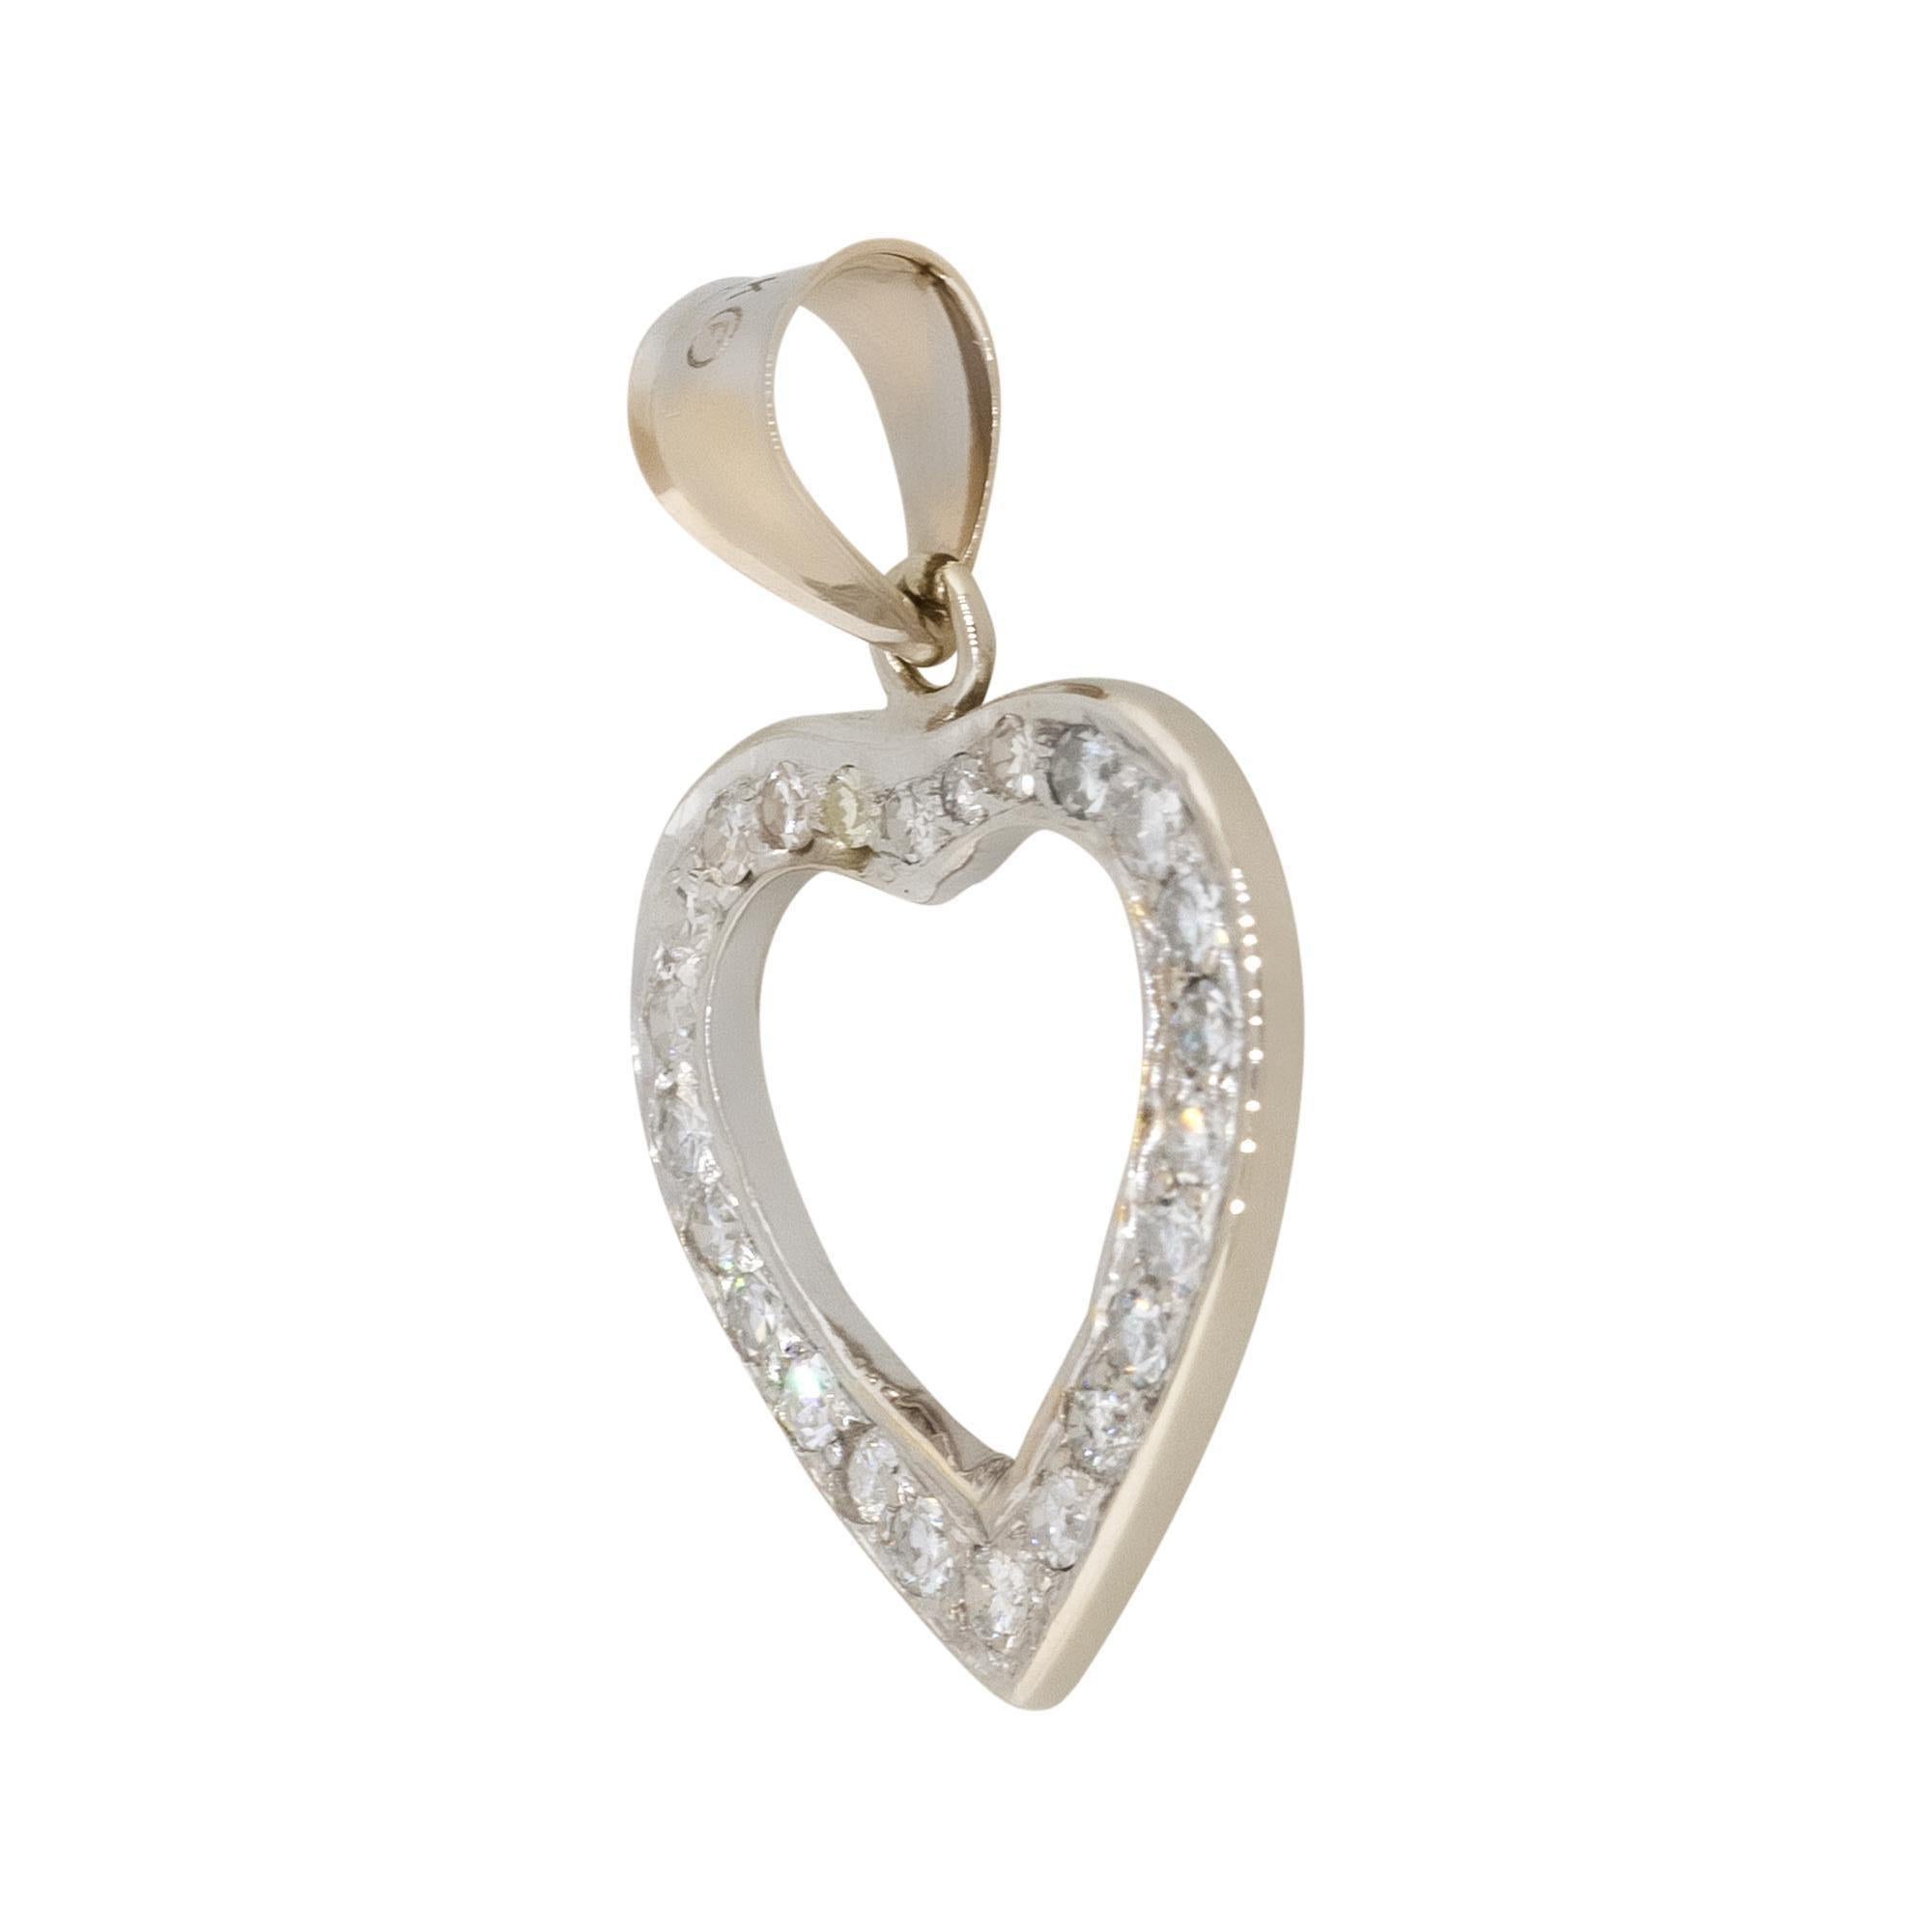 Material: 14k white gold
Diamond Details: Approx. 1ctw of round cut Diamonds. Diamonds are G/H in color and VS in clarity
Total Weight: 2.5g (1.6dwt) 
Pendant measurements: 20mm x 6mm x 27.5mm
Additional Details: This item comes with a presentation